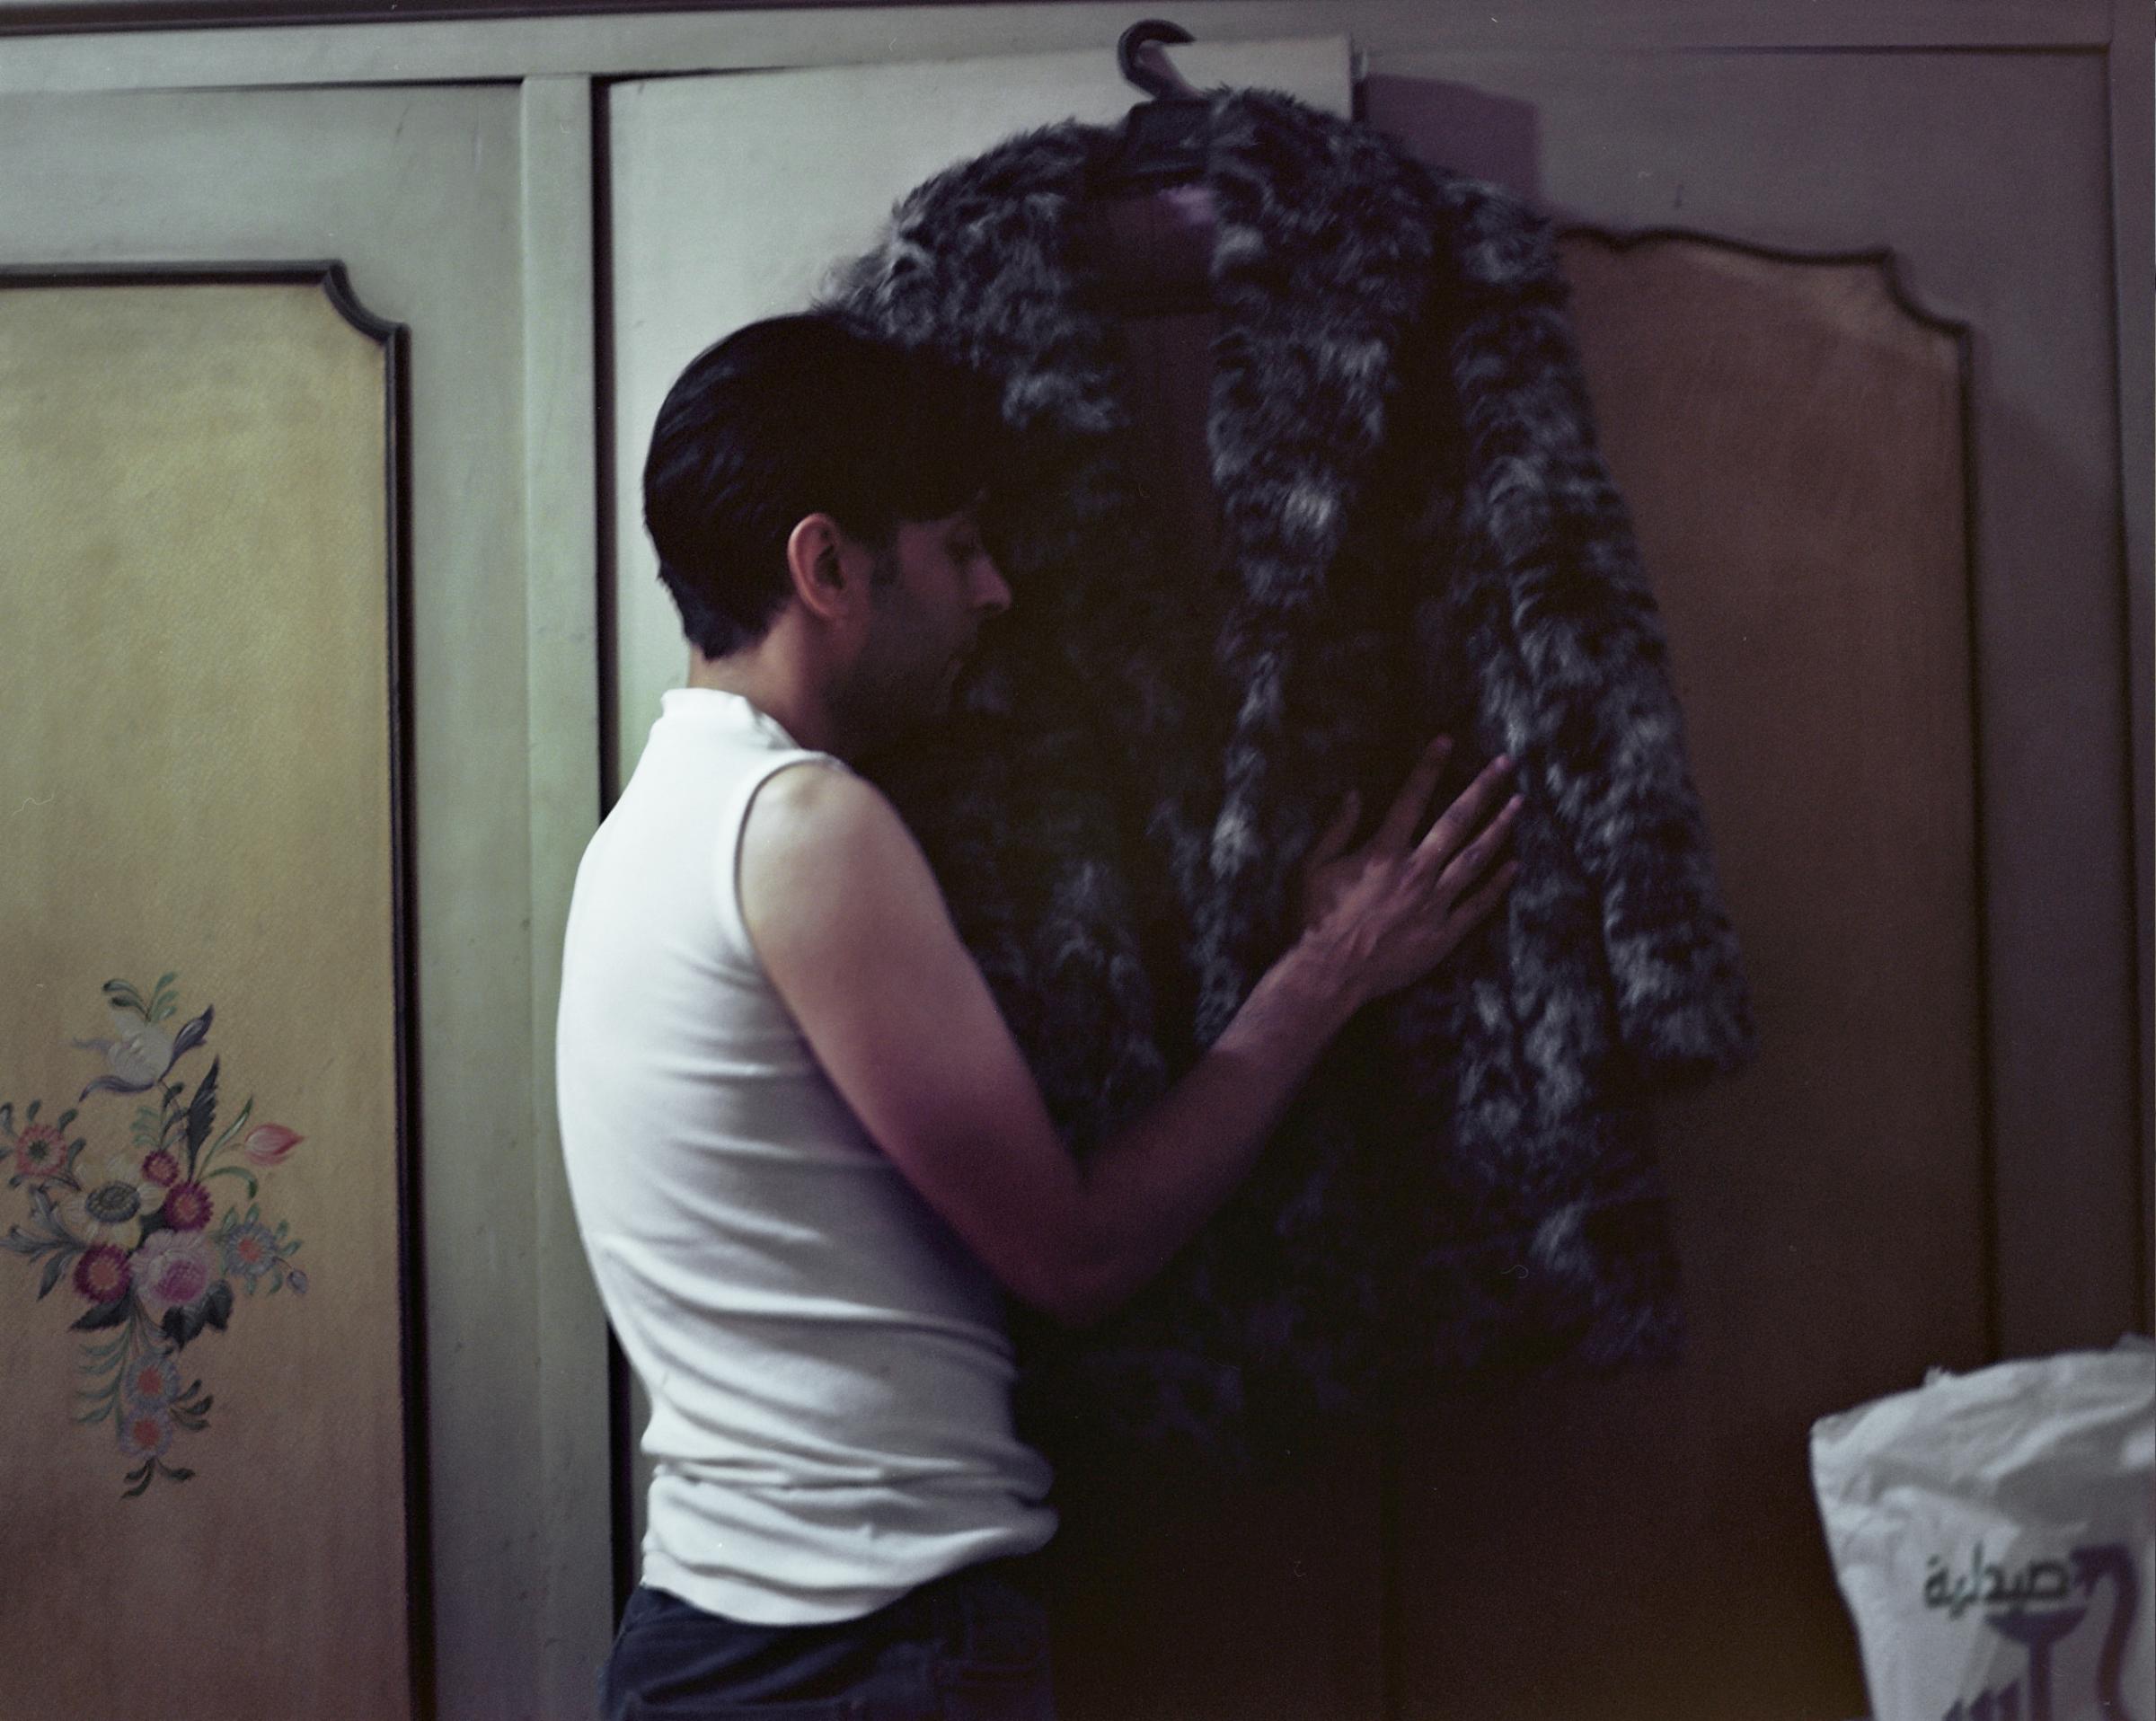  40-year-old Ahmed El-Benawy, touches the fur coat of mother in his parents bedroom at his apartment, in Cairo, Egypt. &quot;My mother is the one who helped me understand everything surrounding HIV after I found out I was positive,&quot; said Ahmed, who is among thousands of Egyptians living with HIV. She passed away, and now he wants to leave Egypt. He can no longer stand the social stigma around HIV and AIDS. 